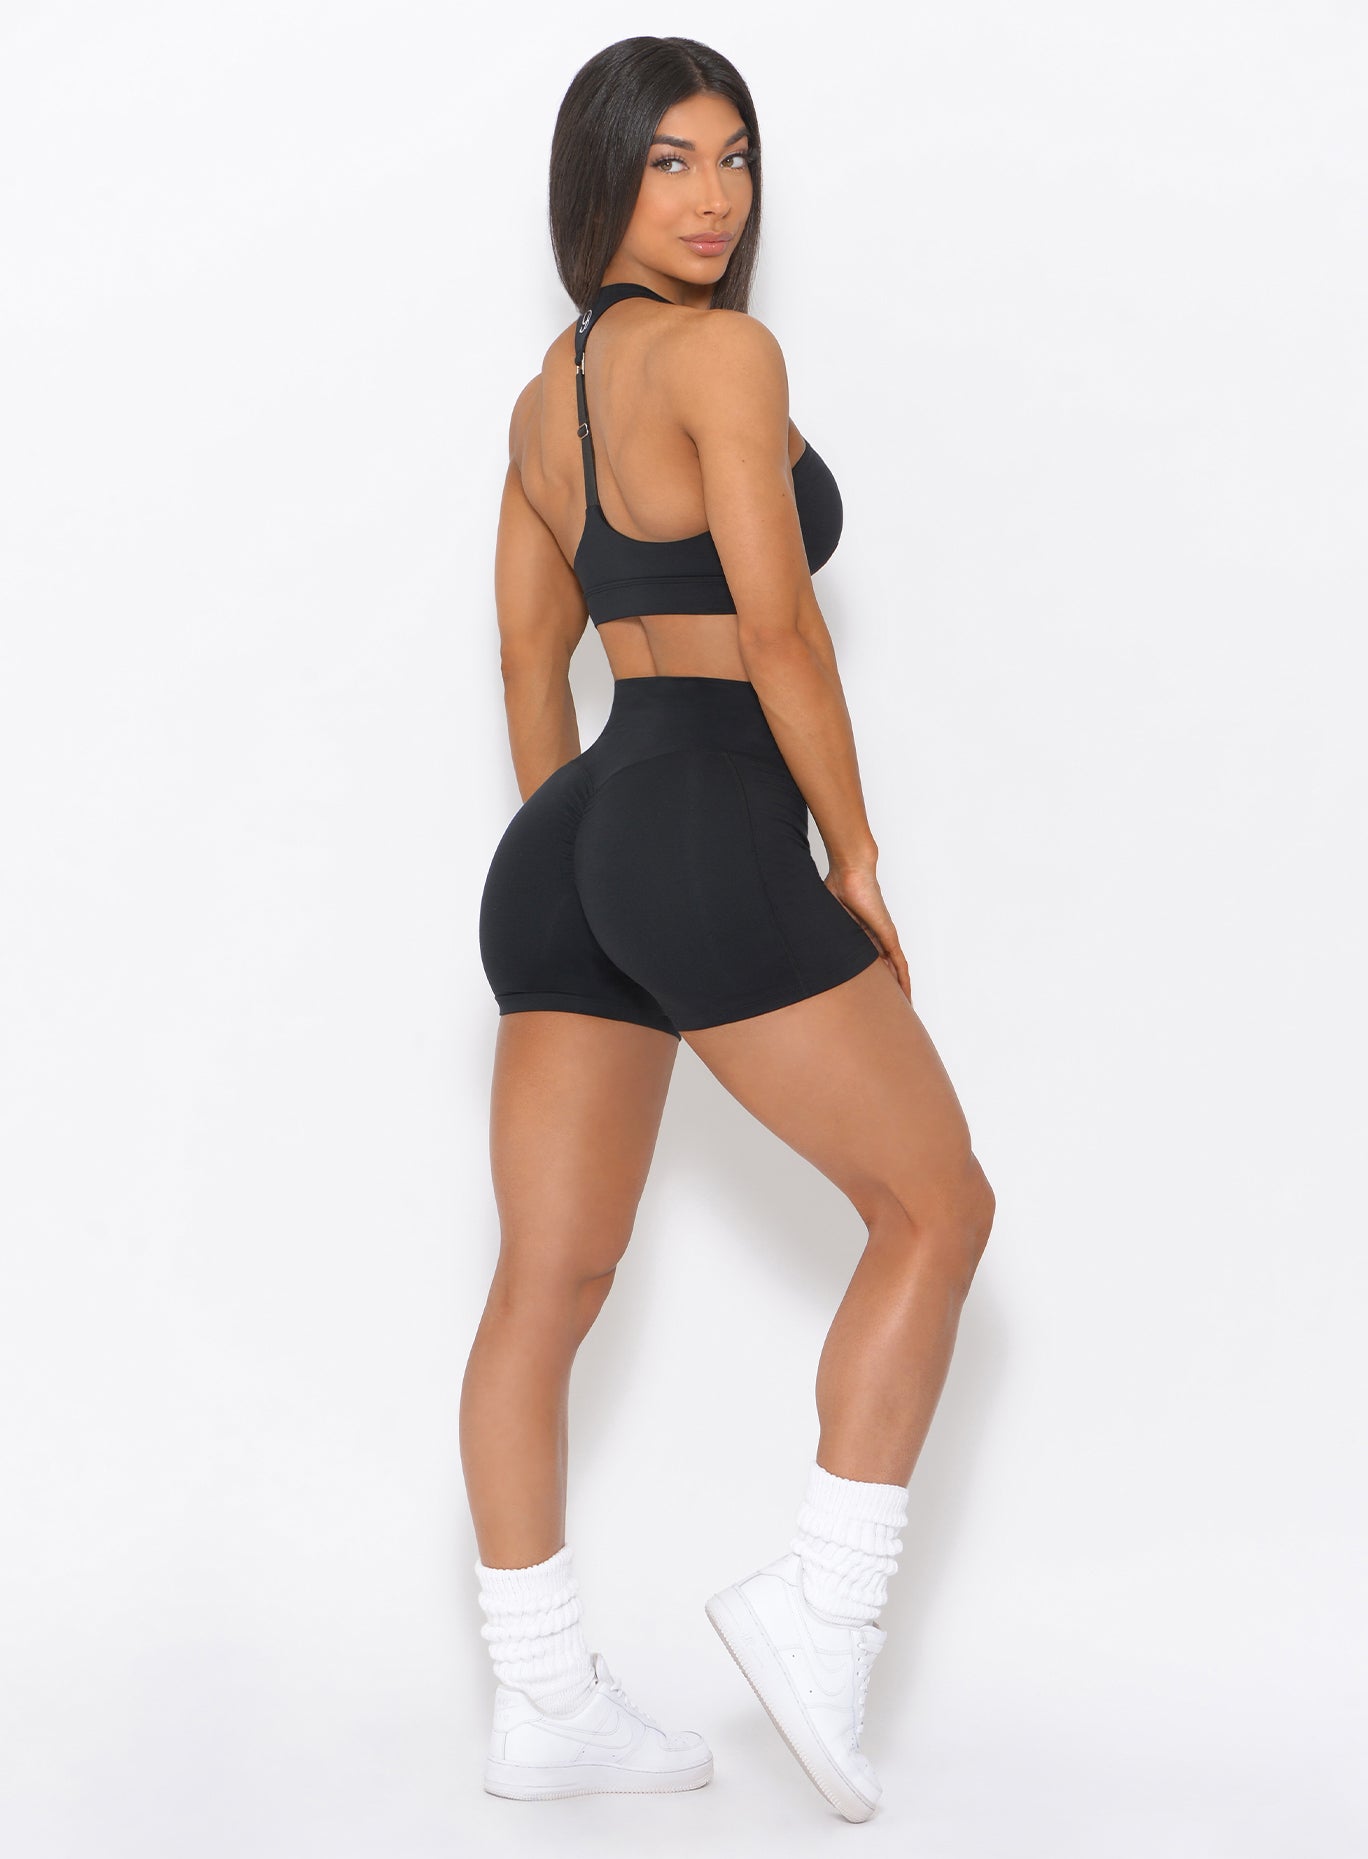 Right side view of the model in our black tiny waist shorts and a matching top